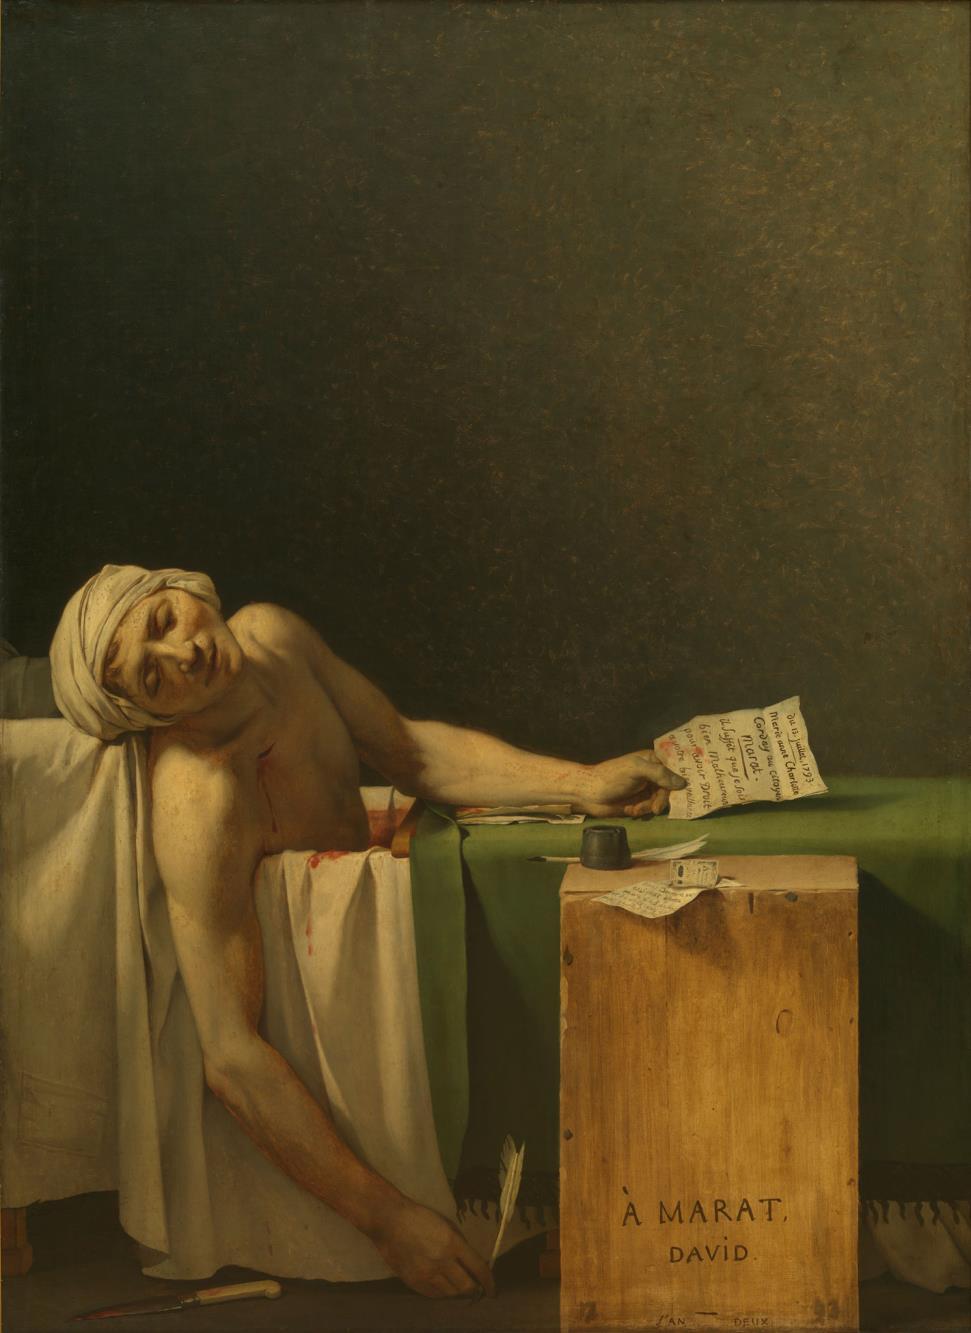 Jean Paul Marat (1743 1793) Jacobin supporter of the Revolution Published a radical journal Friend of the People Inspired and defended the September Massacres of 1792 1200 prisoners in